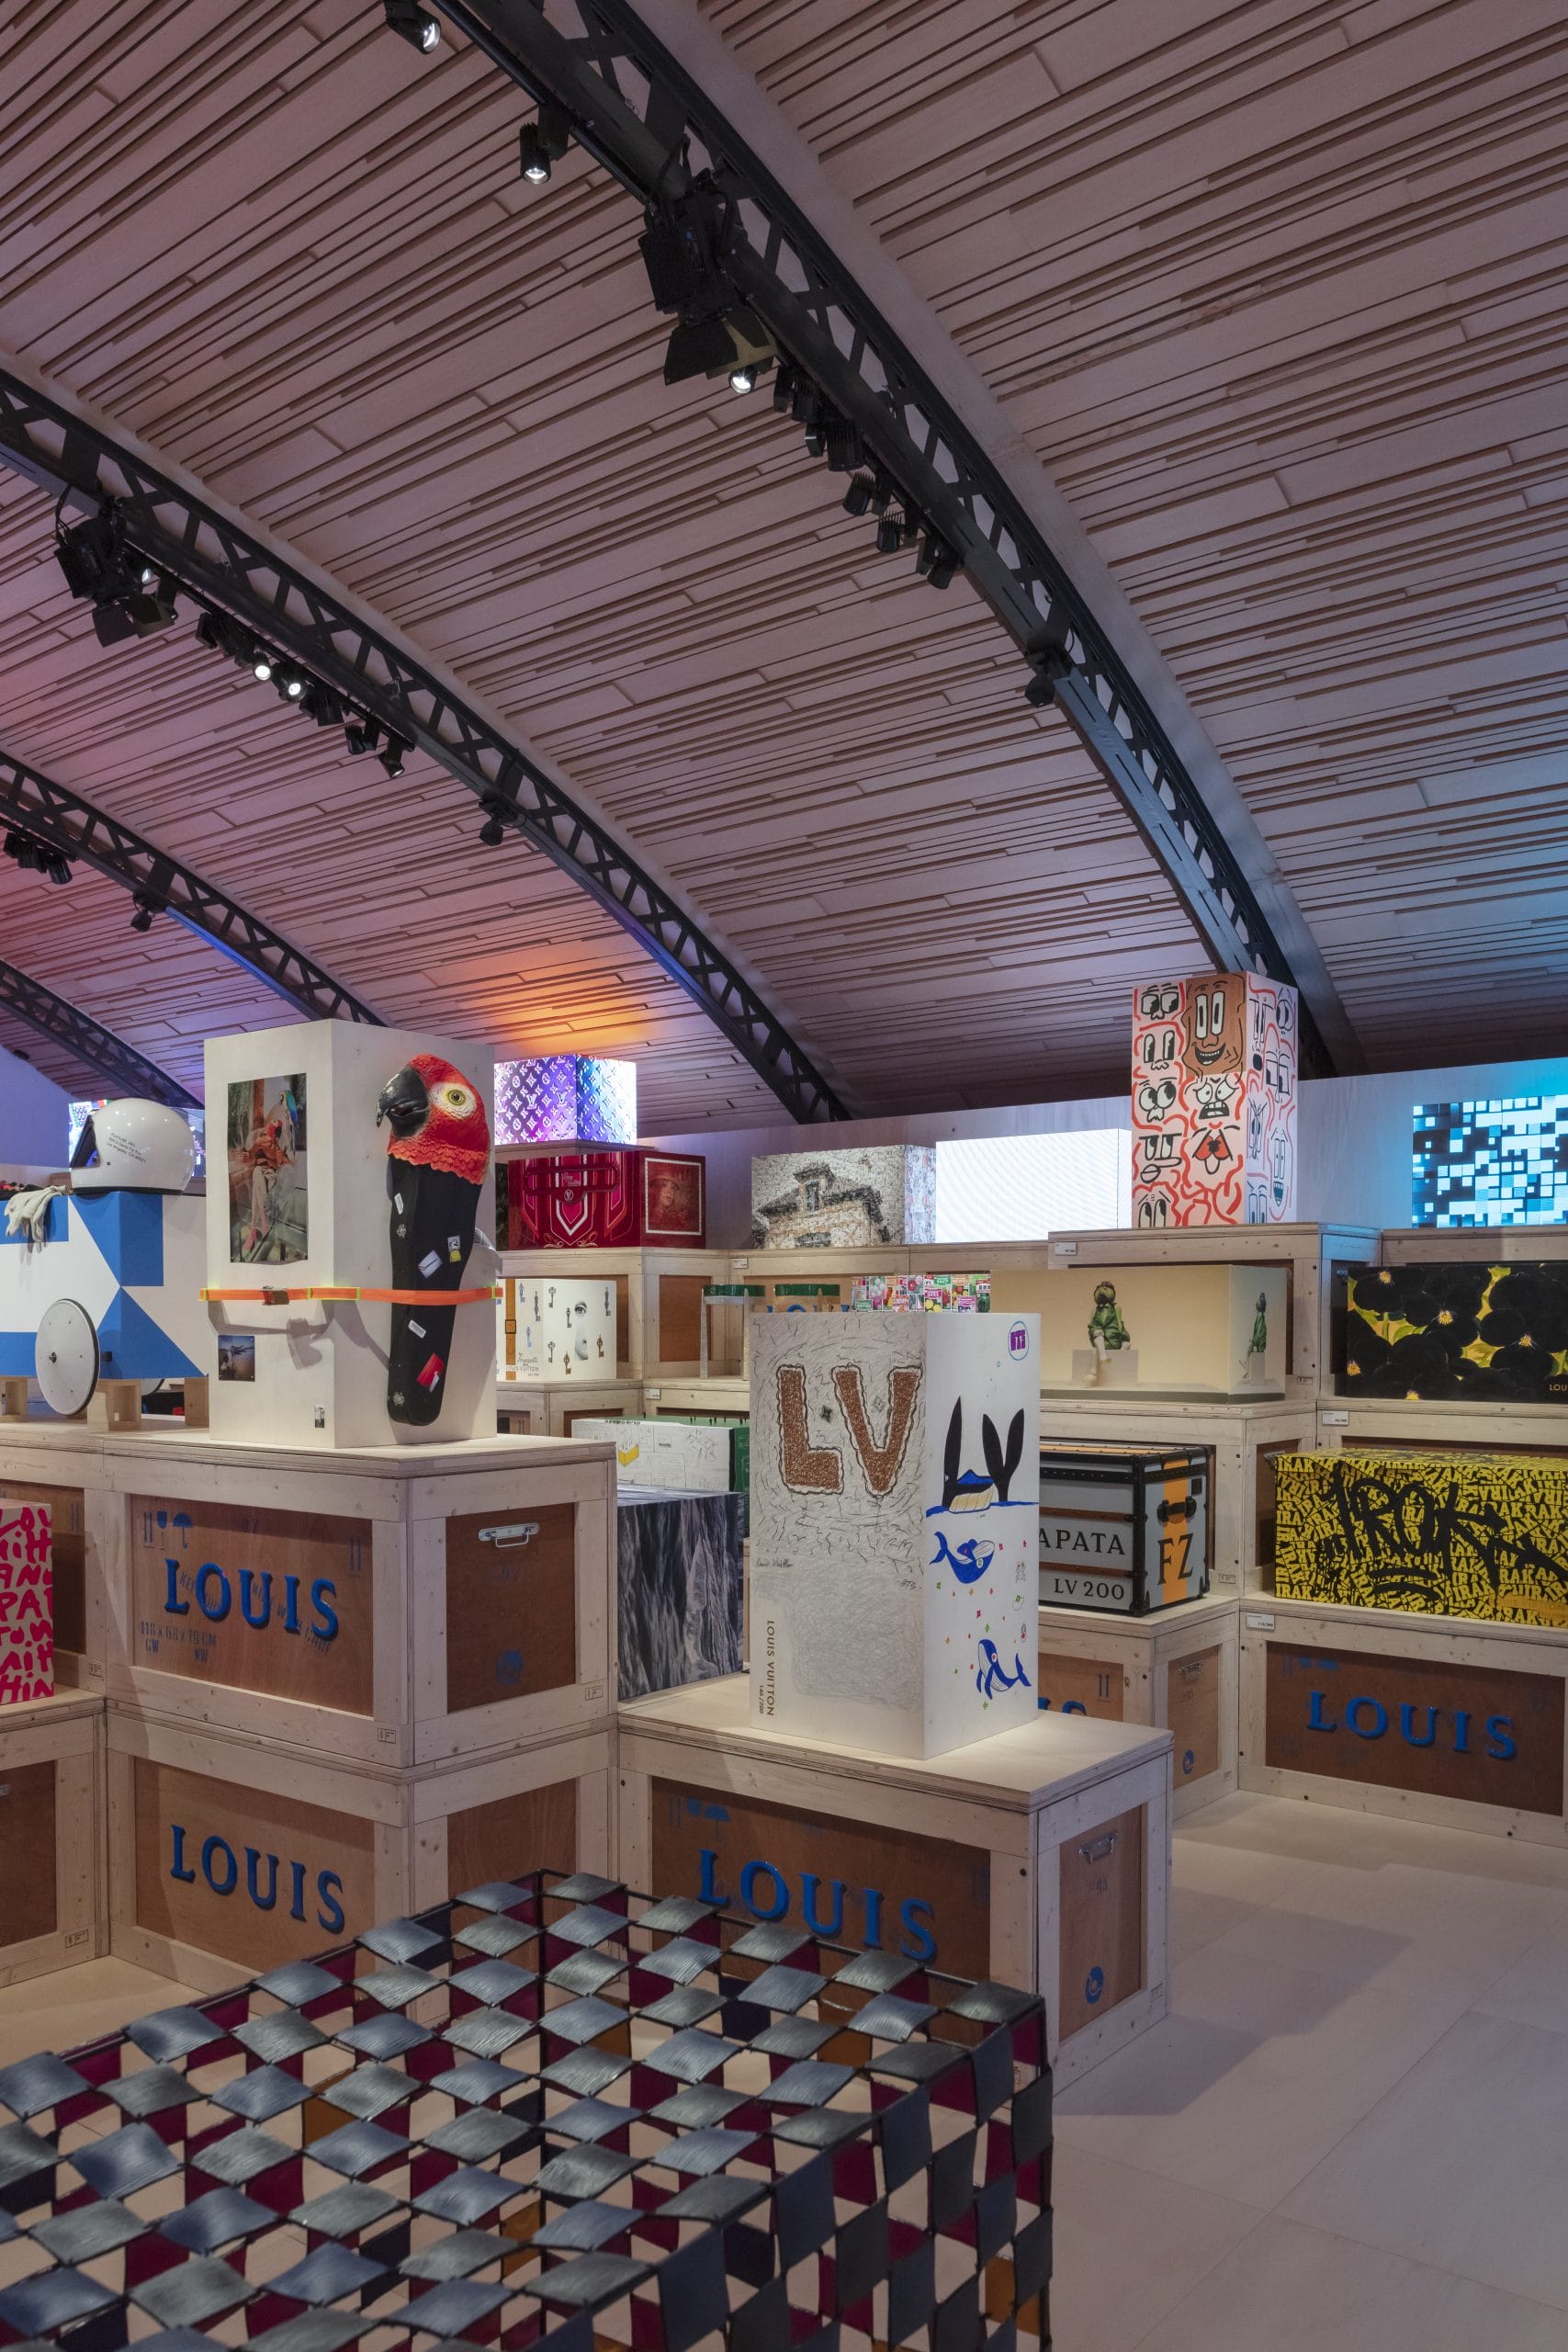 200 Trunks, 200 Visionaries: The Exhibition